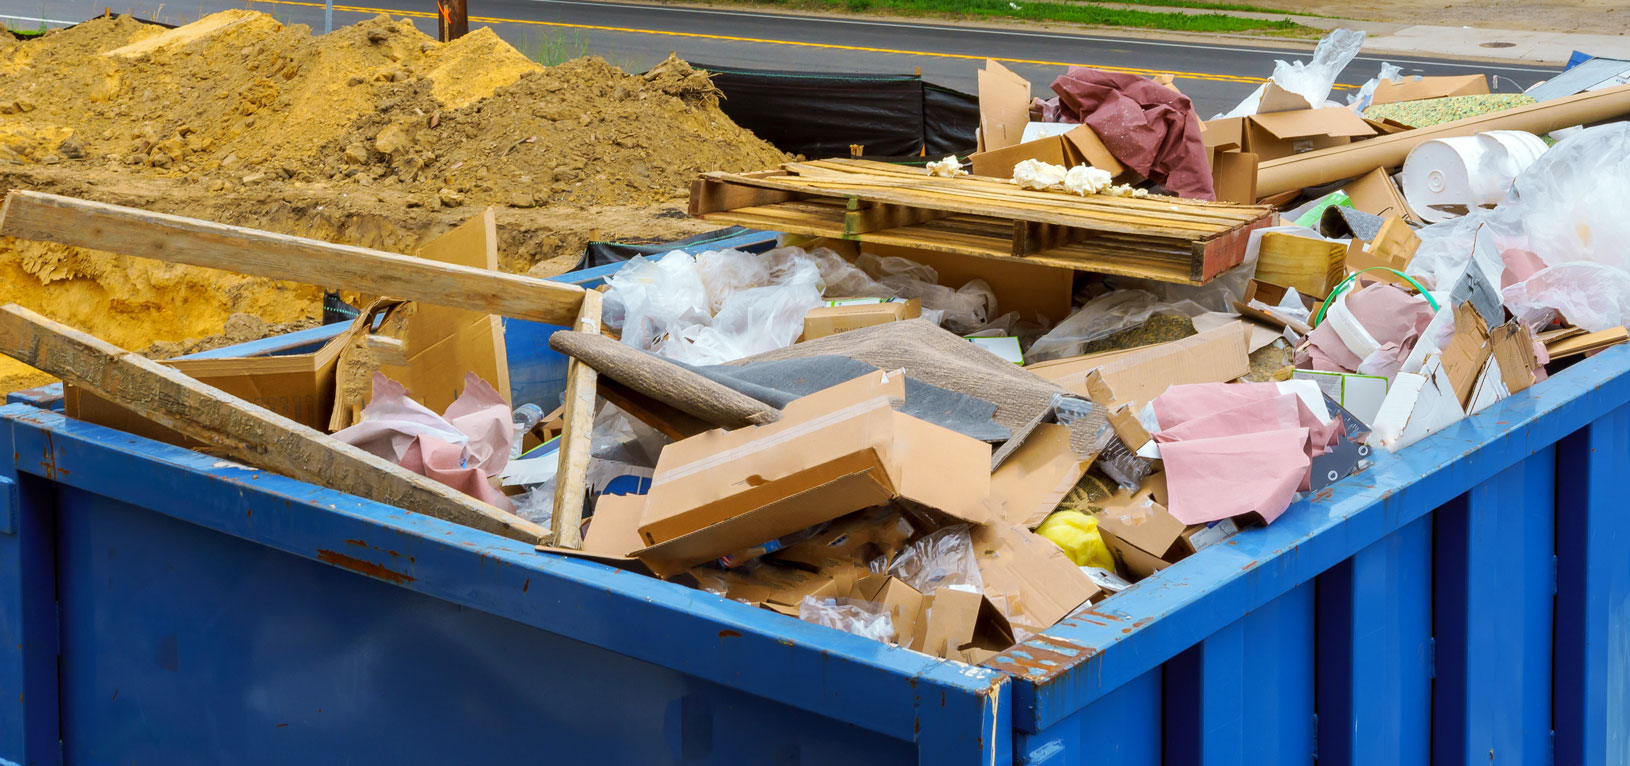 Temecula Junk Removal, Junk Removal Services and Junk Removal Company